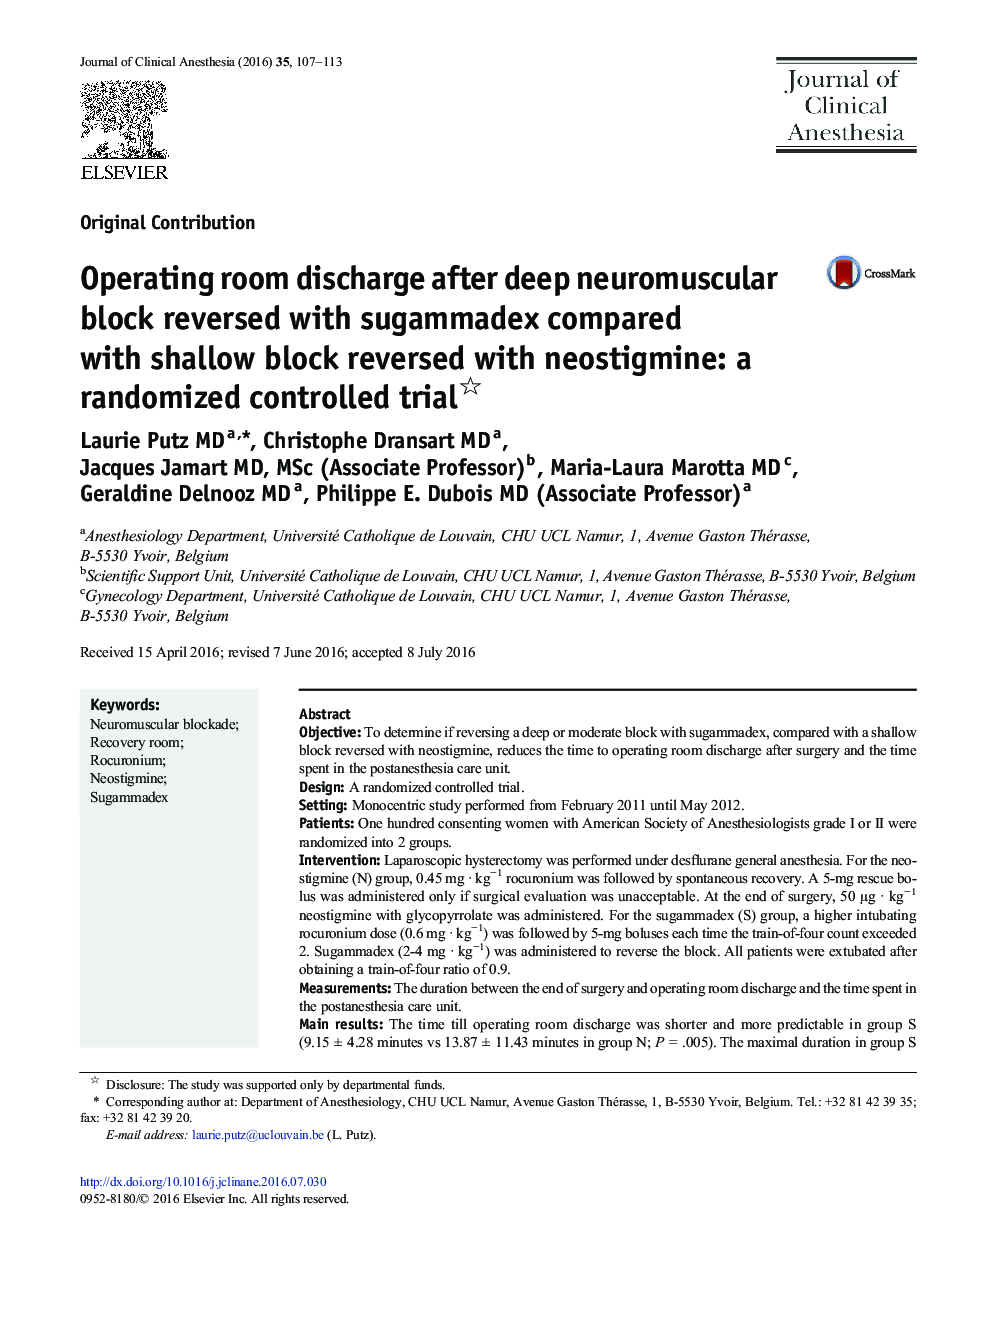 Operating room discharge after deep neuromuscular block reversed with sugammadex compared with shallow block reversed with neostigmine: a randomized controlled trial